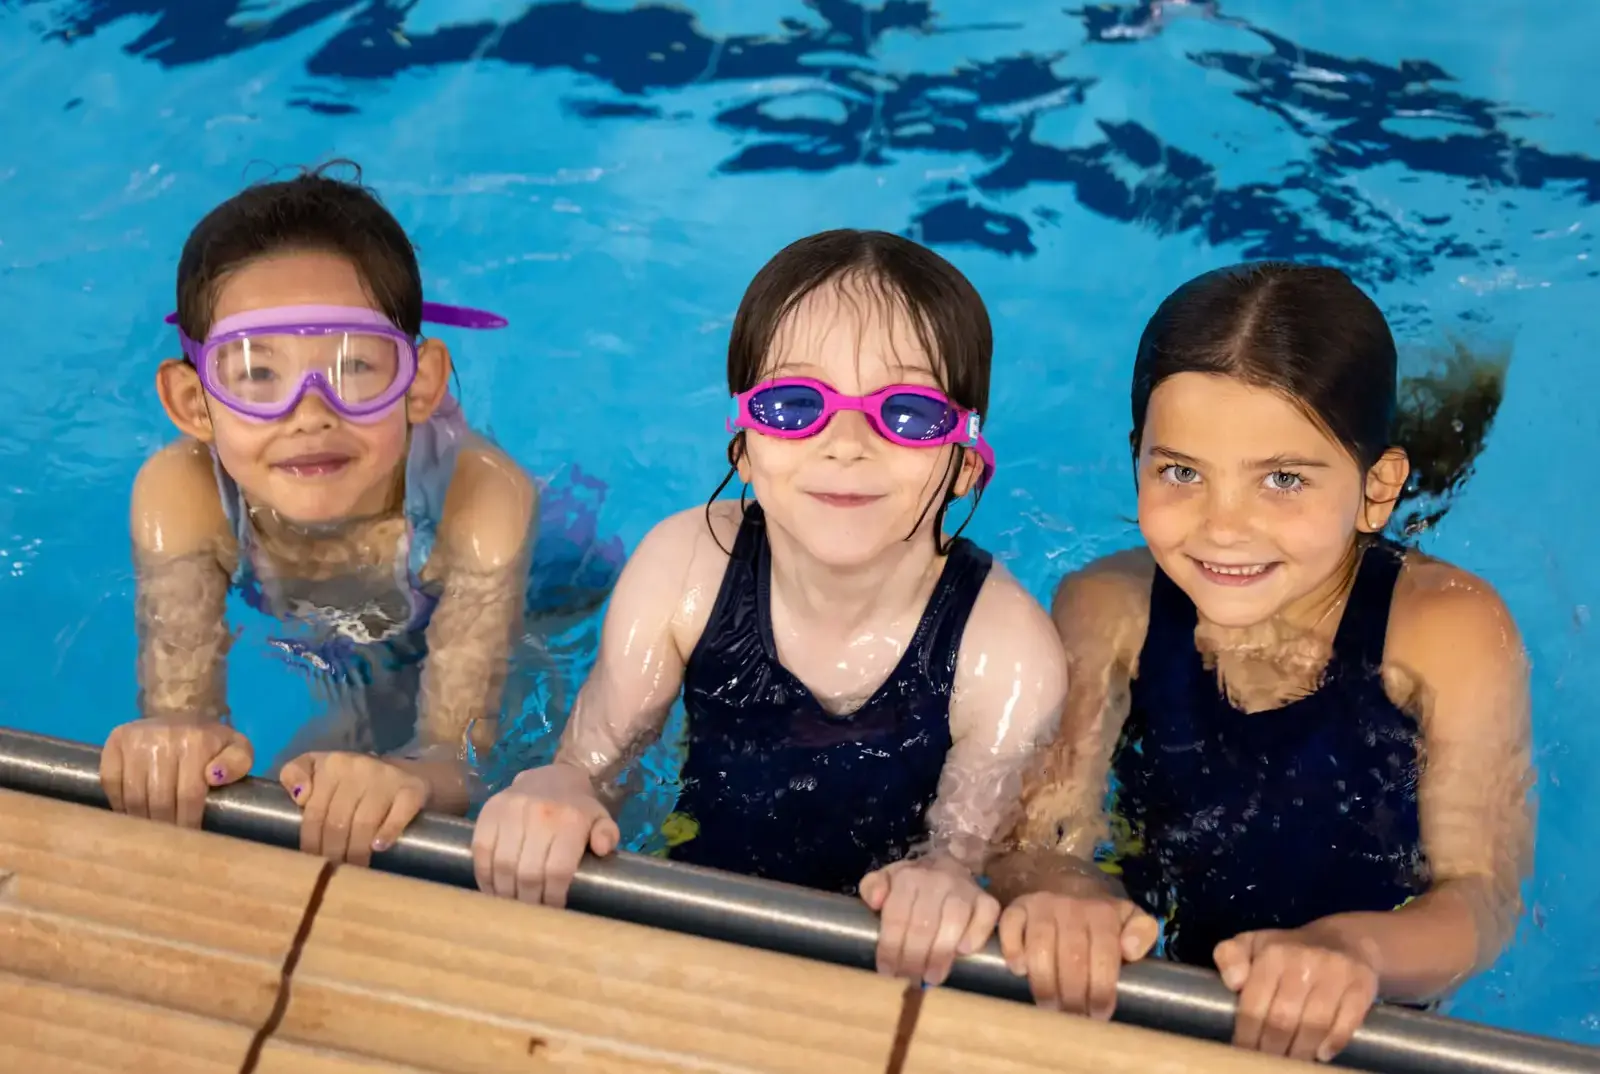 Chapter House pupils at a swimming lesson